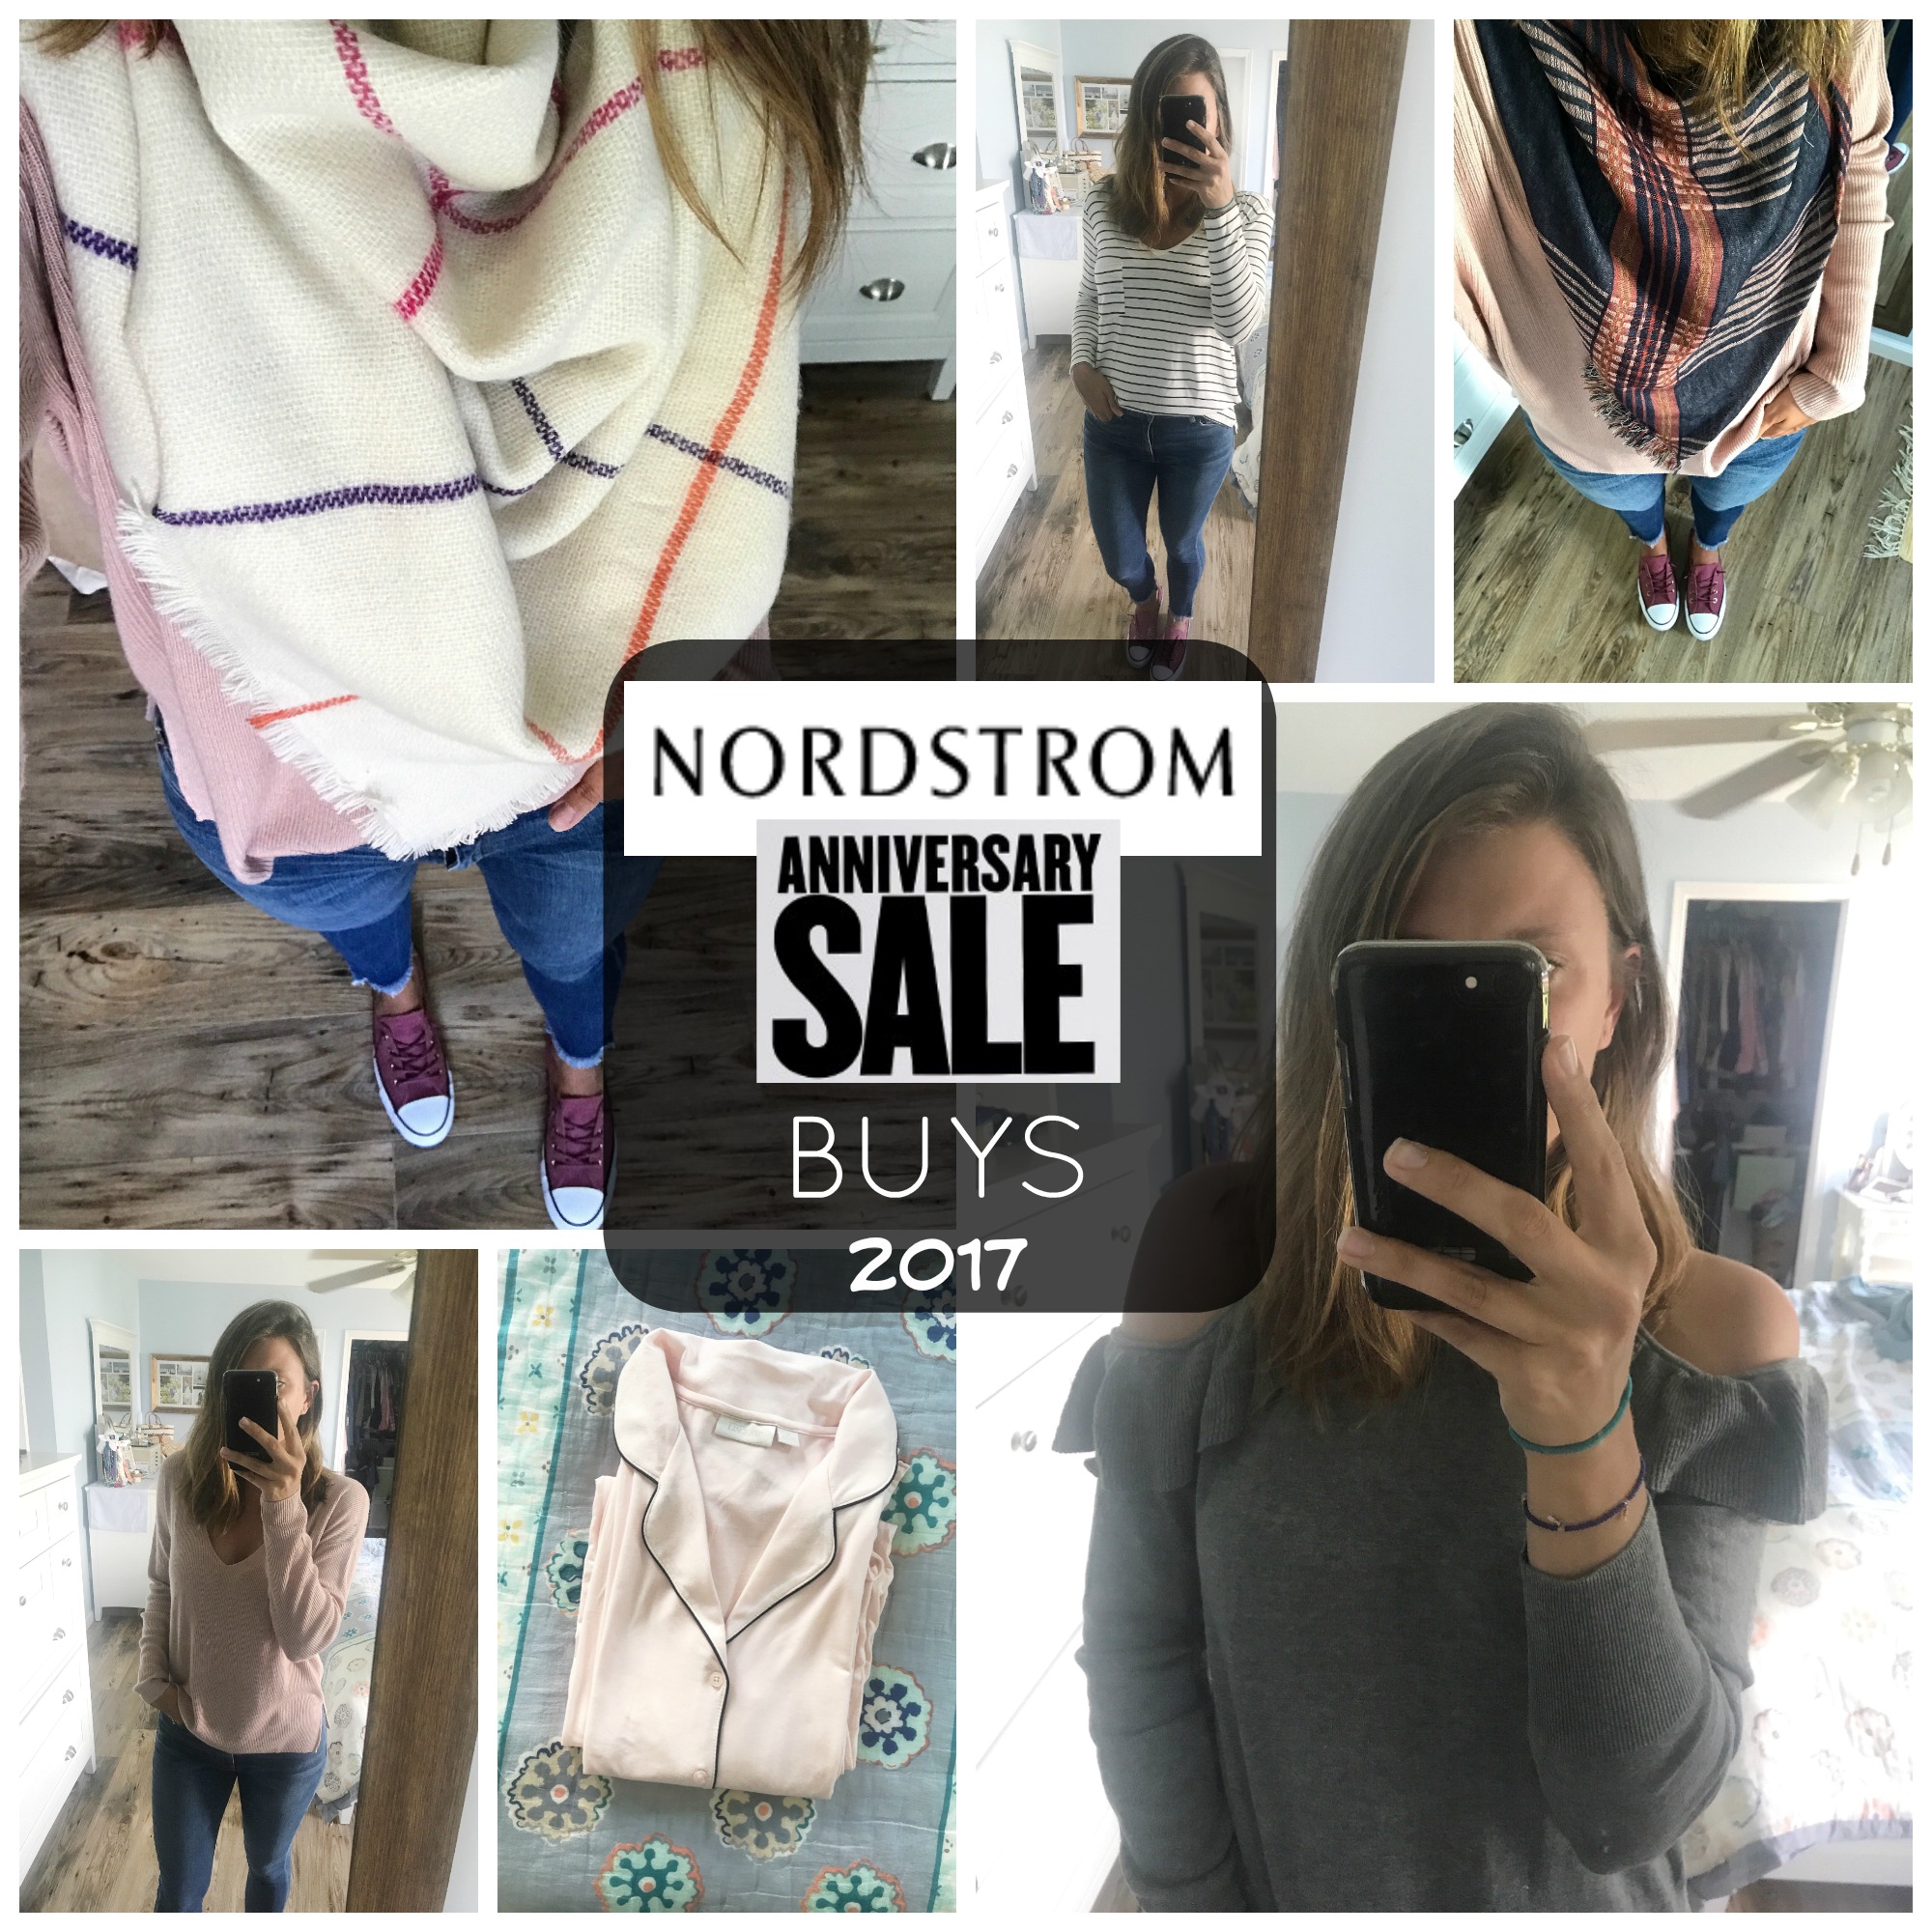 Nordstrom Anniversary Sale Buys 2017